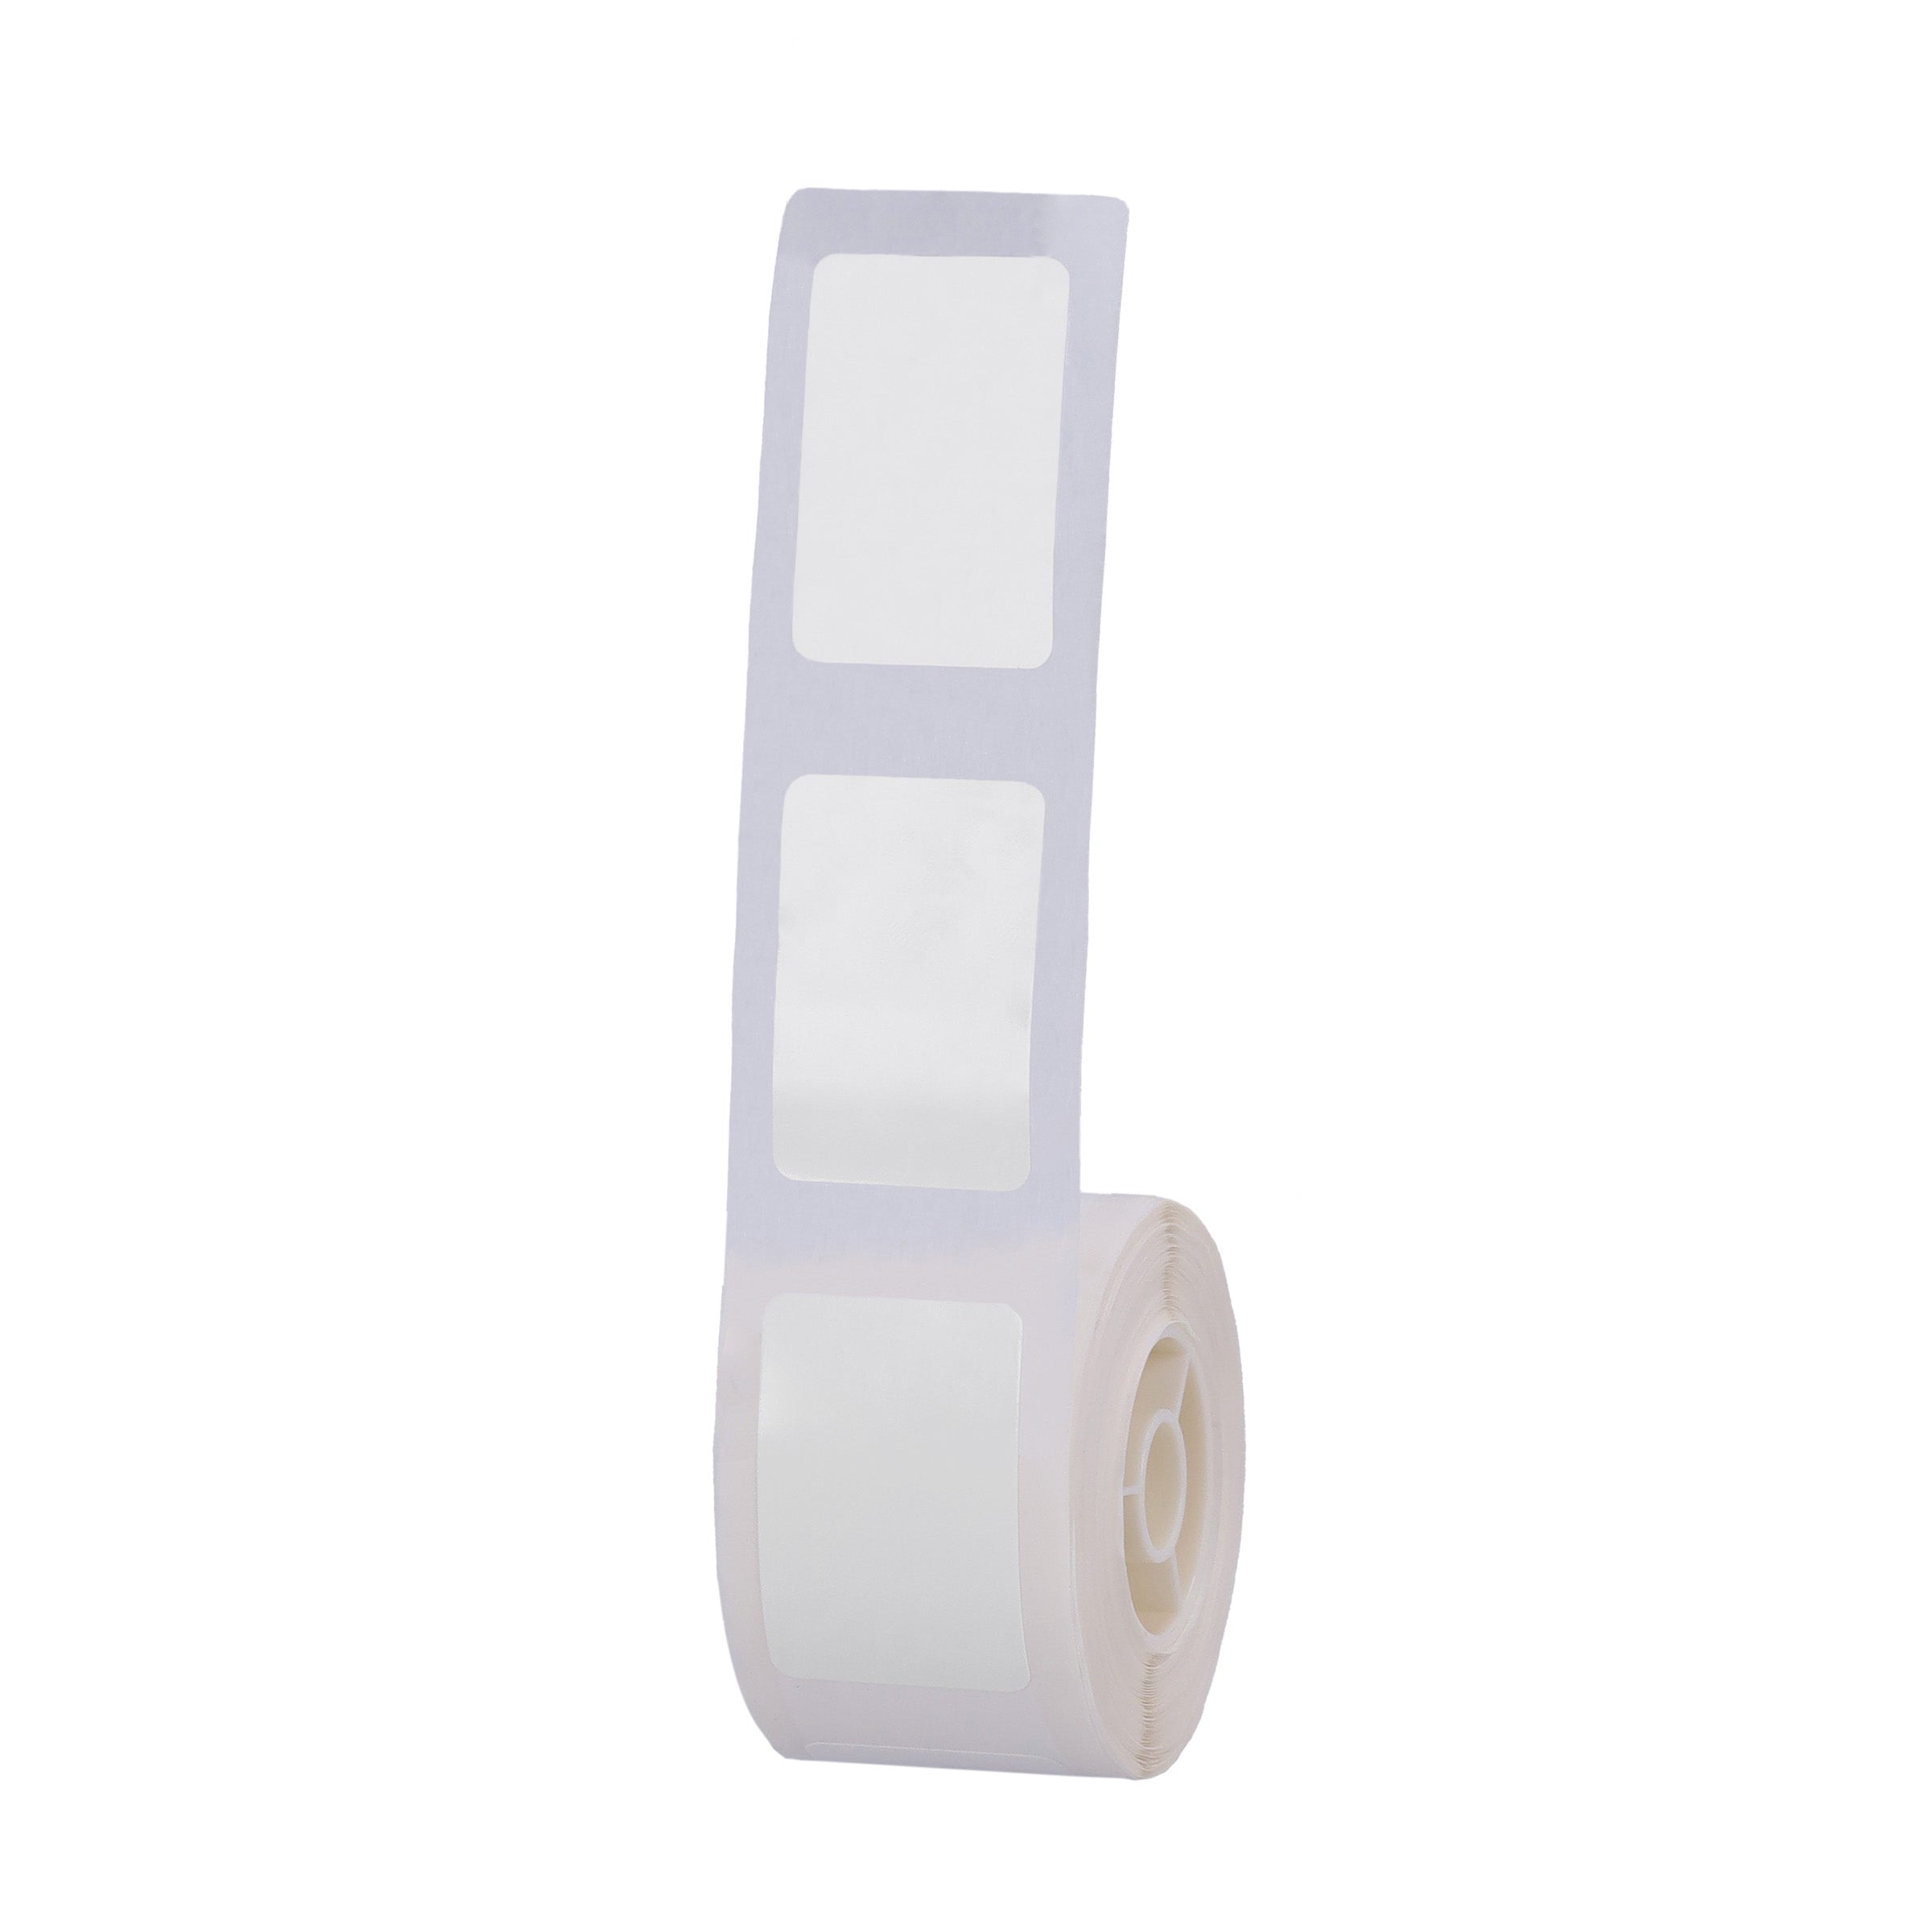 NB313 - NIIMBOT - D101 ONLY - R20*30 - 210 LABELS PER ROLL - WHITE